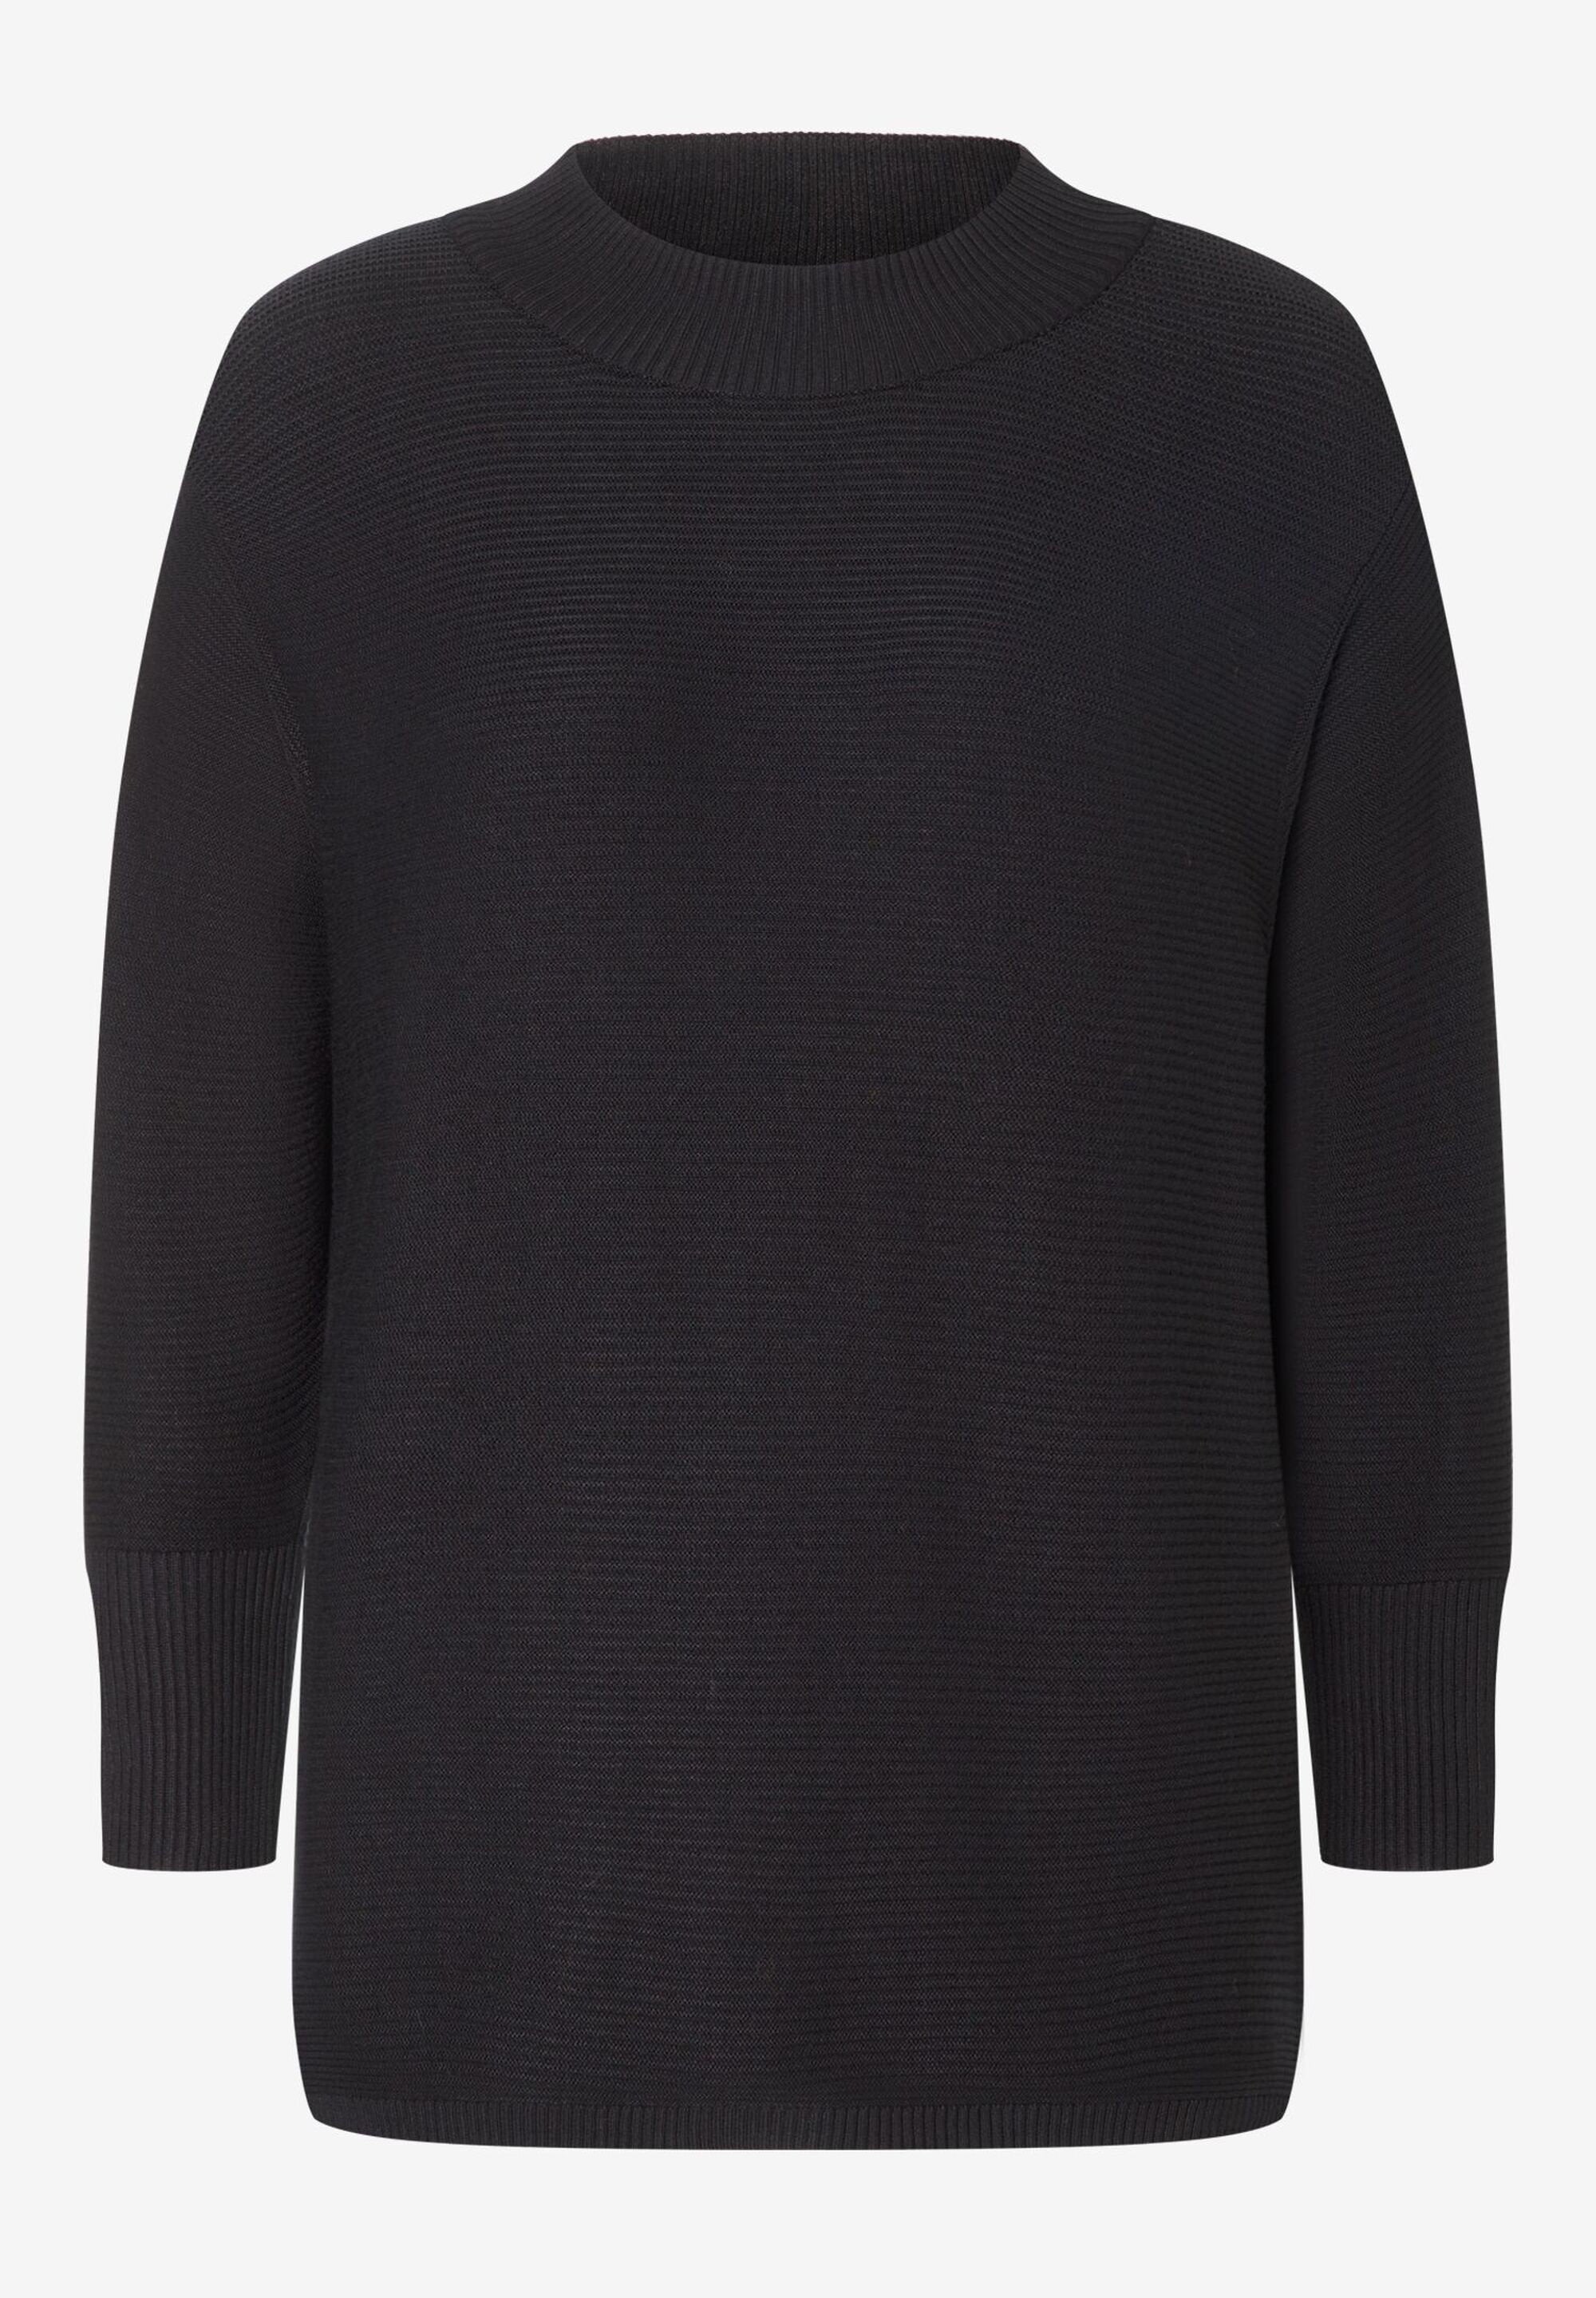 Black Pullover With 3/4 Sleeve_31081052_0790_02